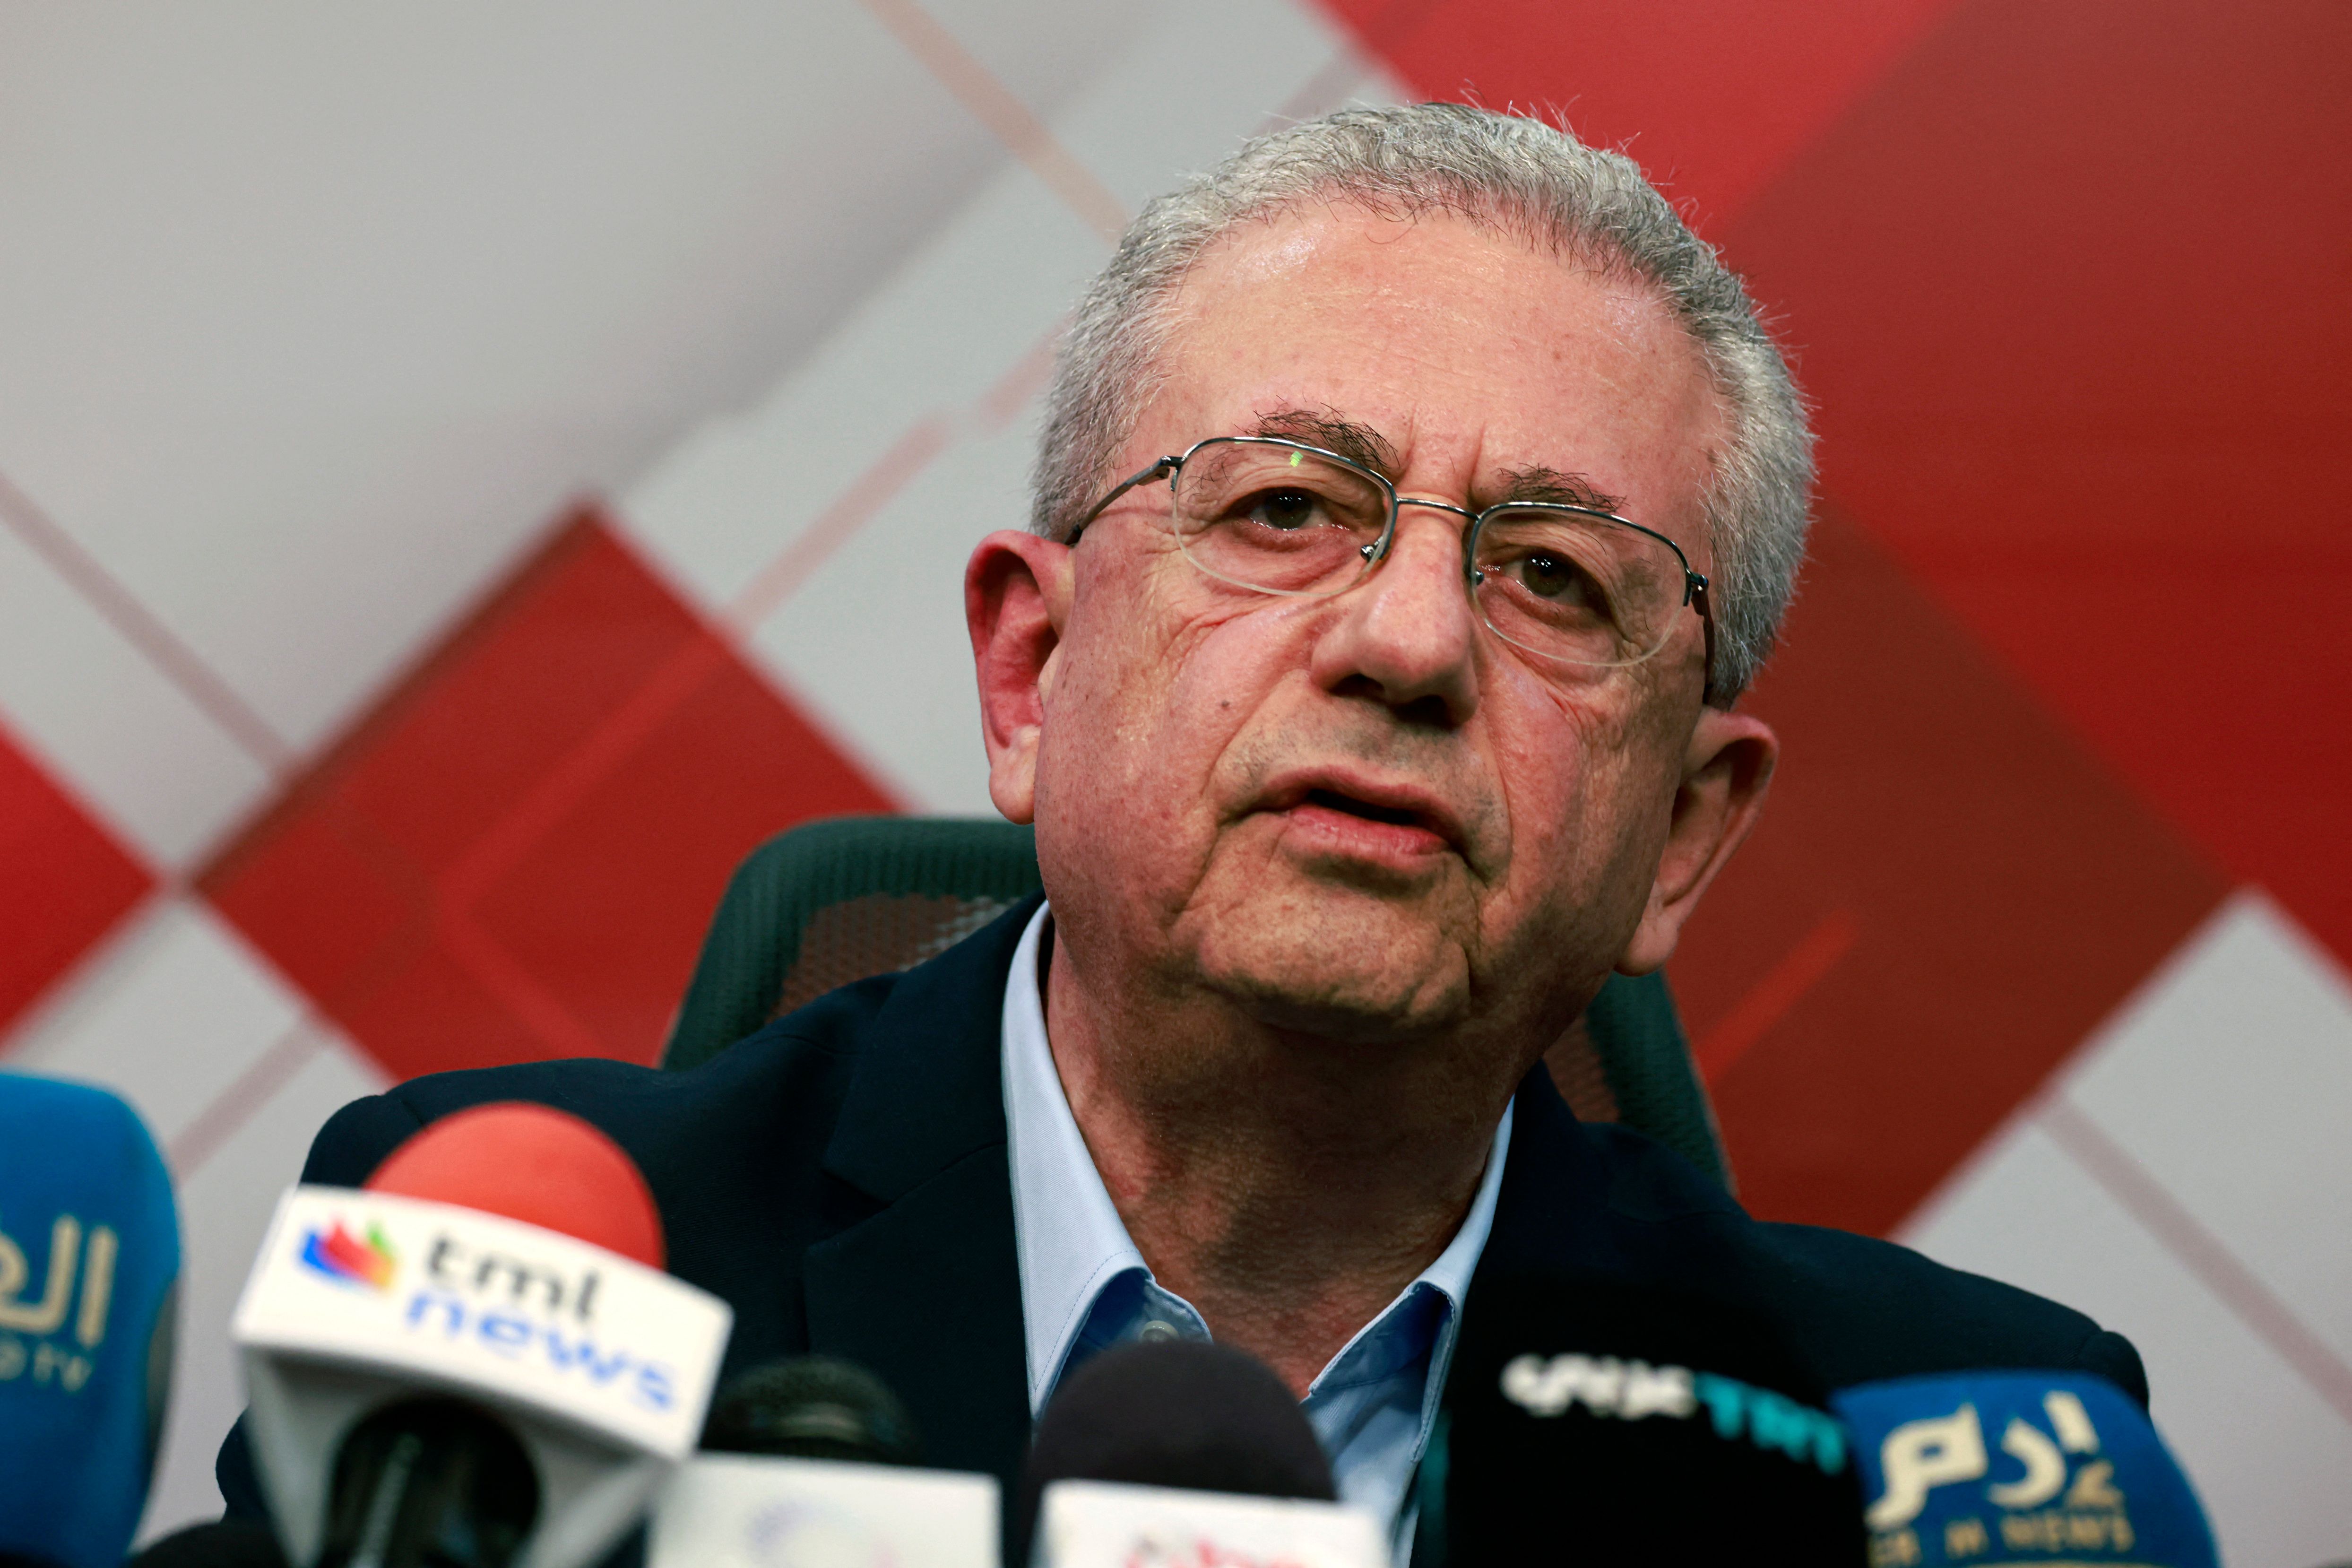 Mustafa Barghouti, leader of the Palestinian National Initiative, speaks during a press conference in Ramallah, West Bank, on October 15.